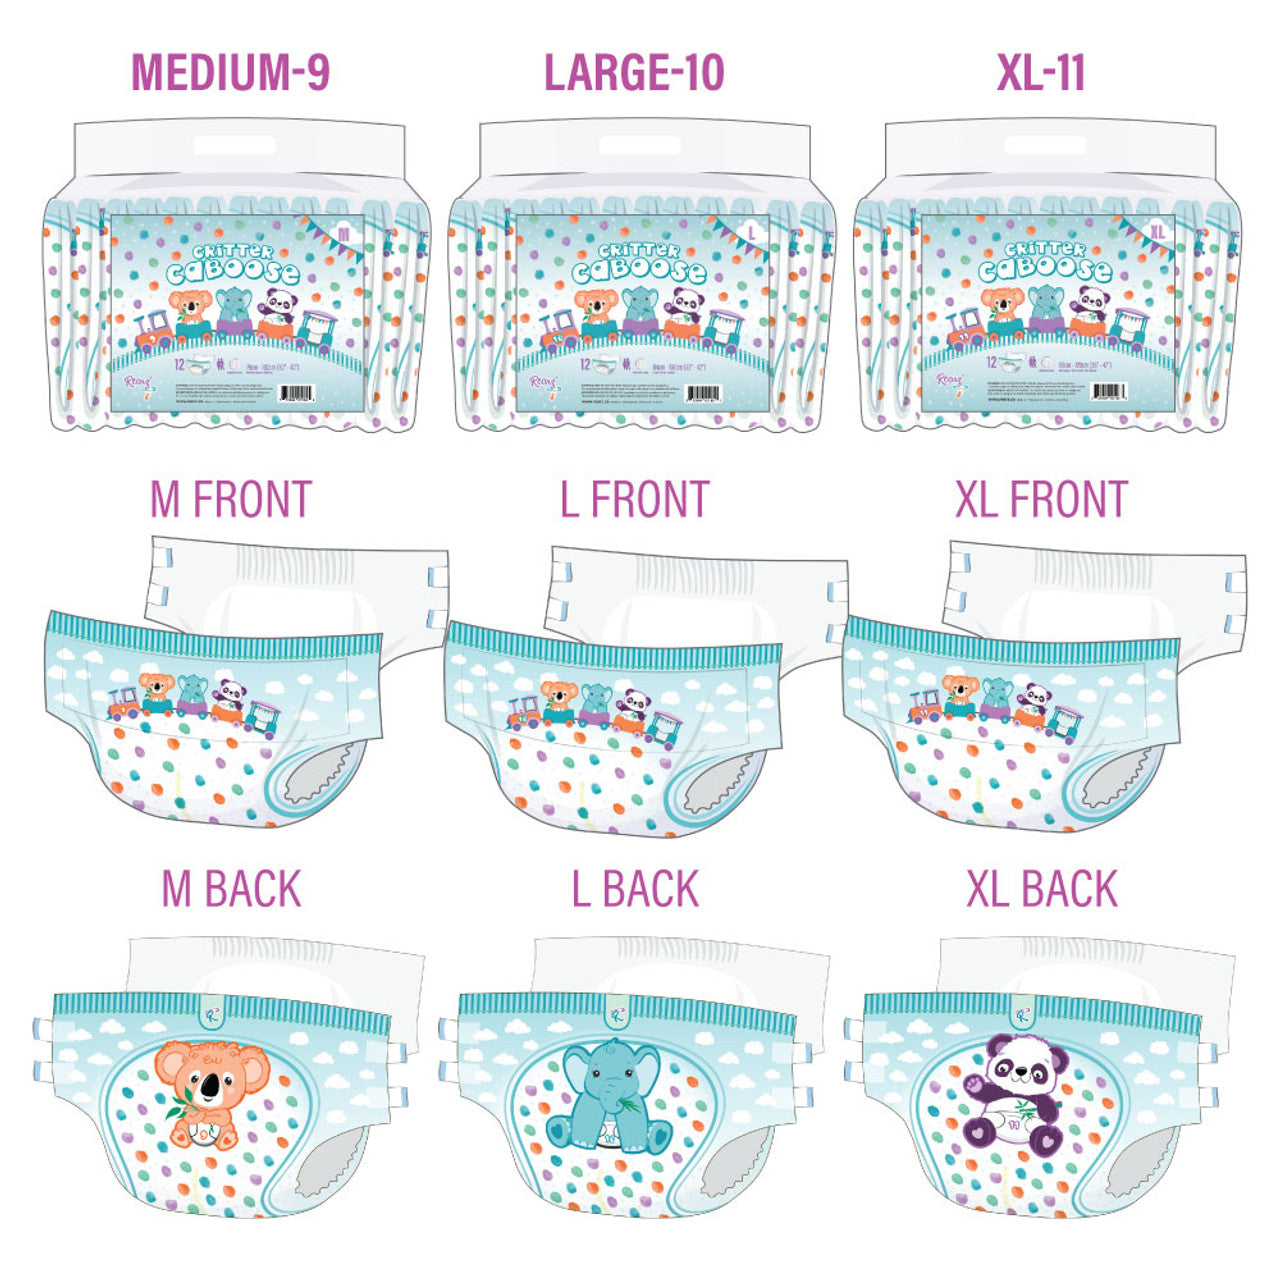  Rearz - Critter Caboose Brief Adult Printed Diapers